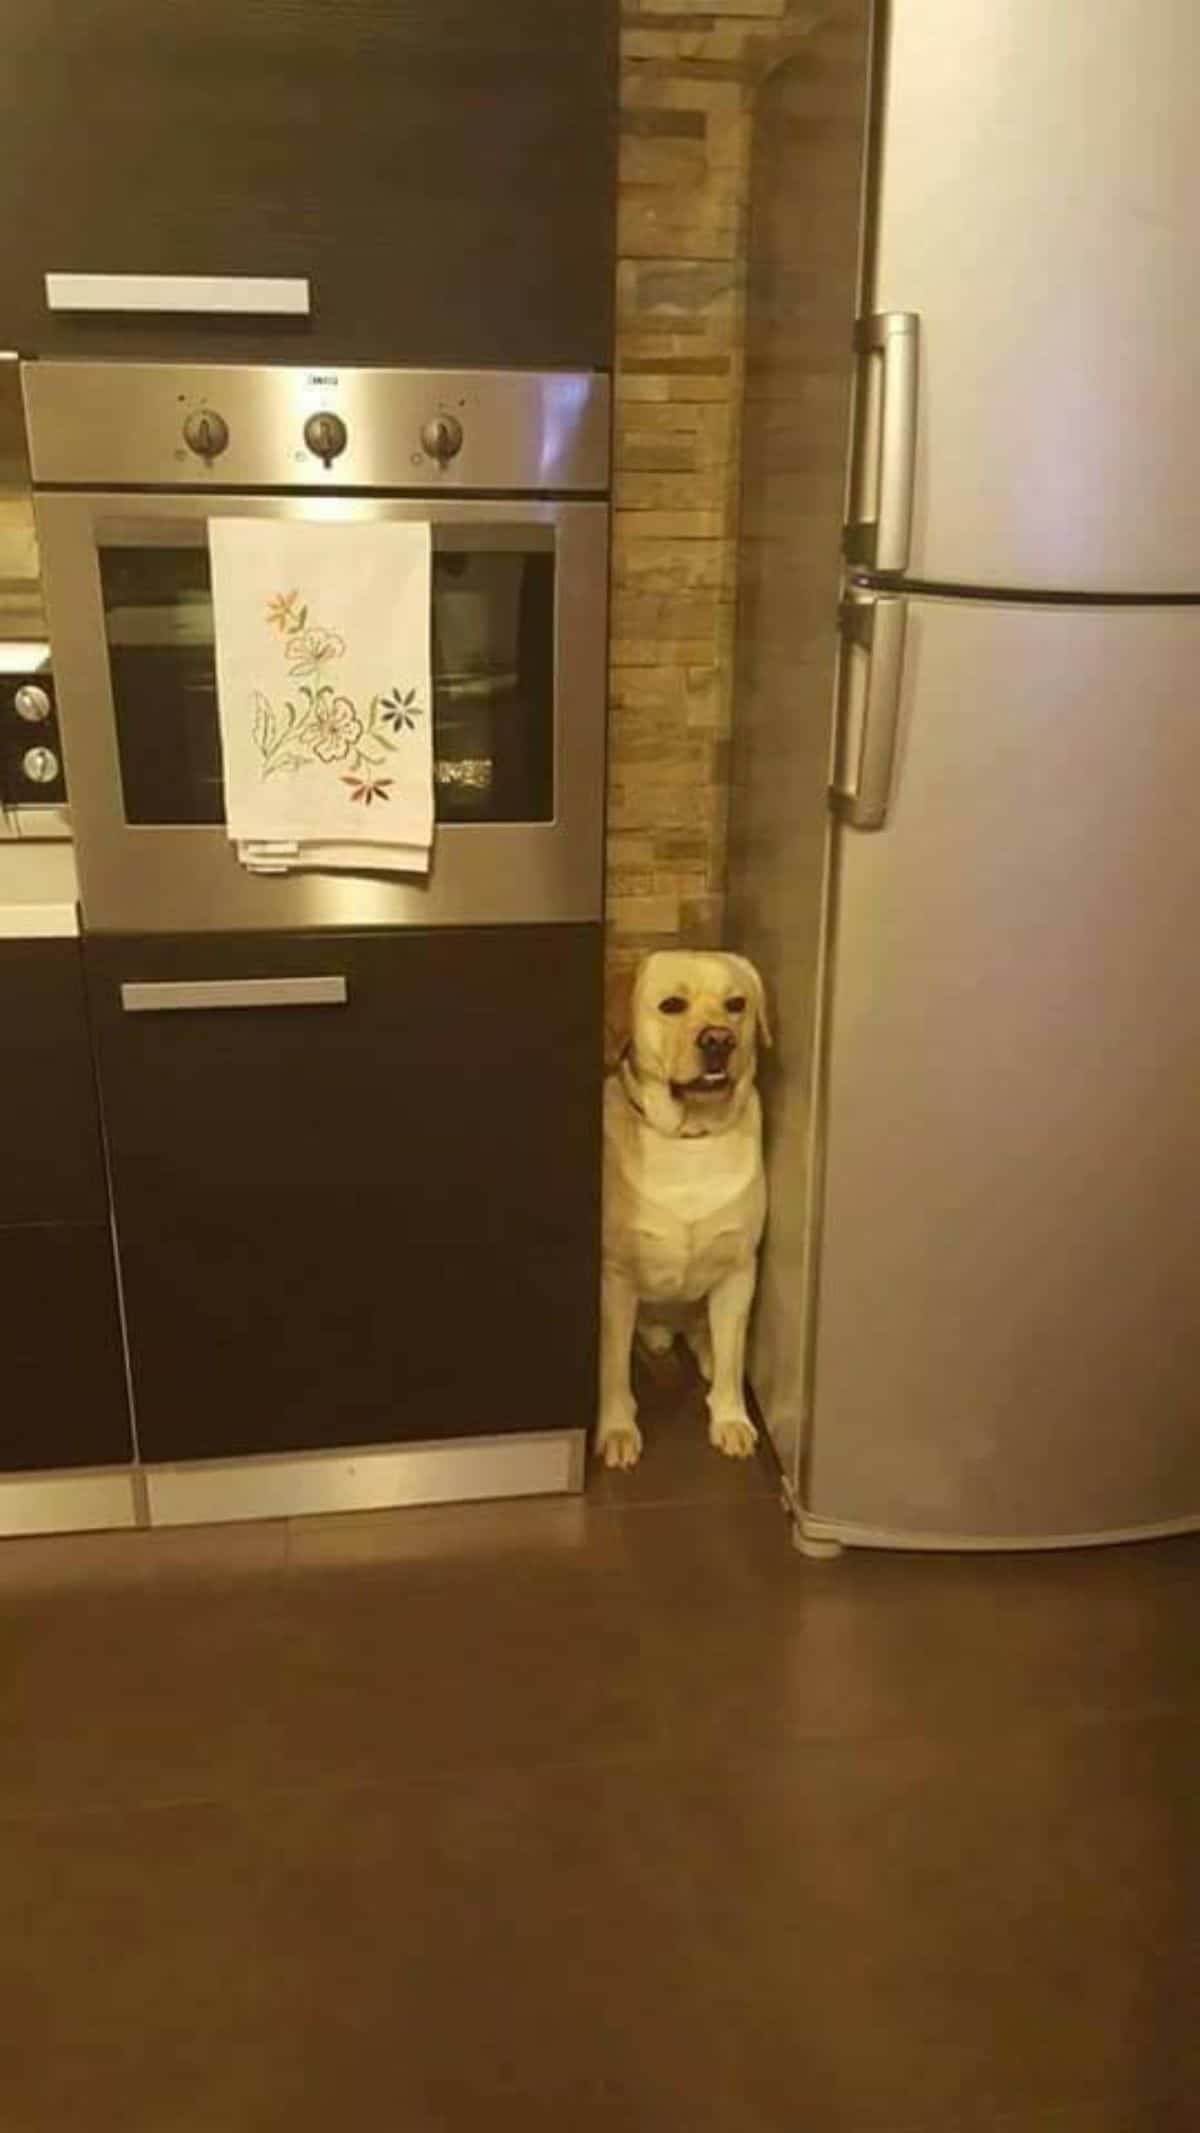 yellow labrador retriever standing in the gap between a black and silver stove and a silver fridge